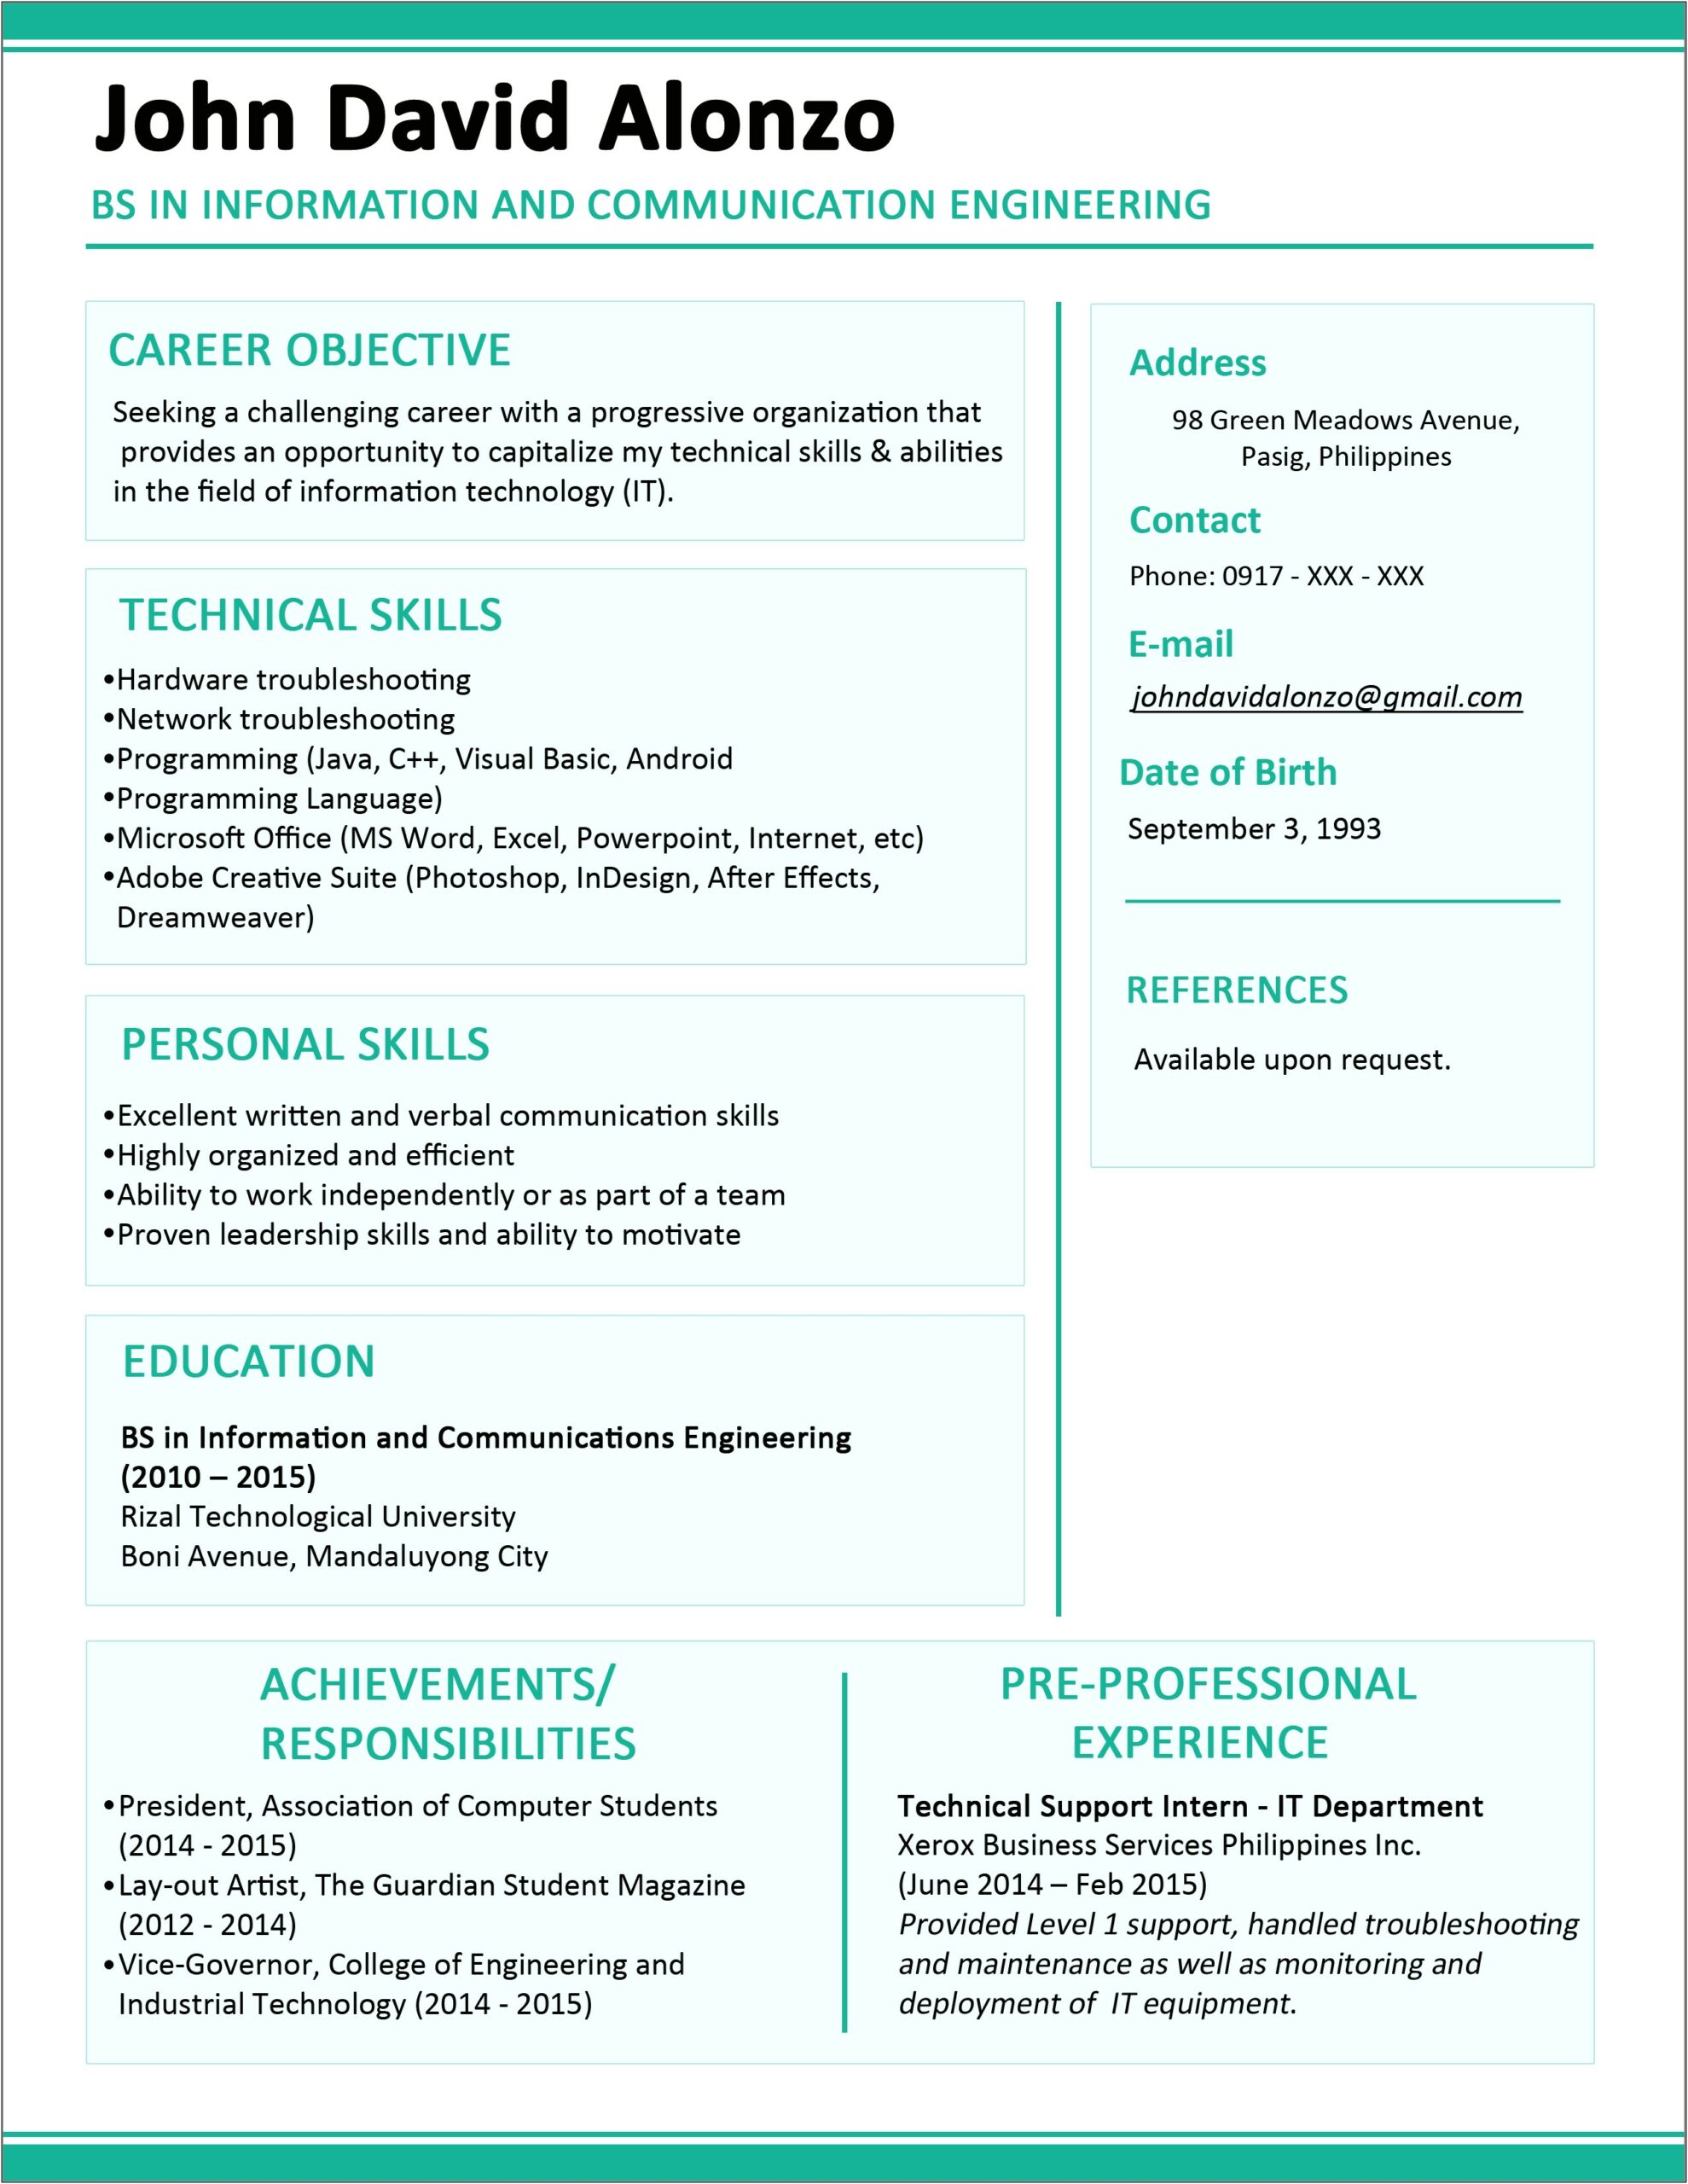 Resume For Job Seeker With Experience